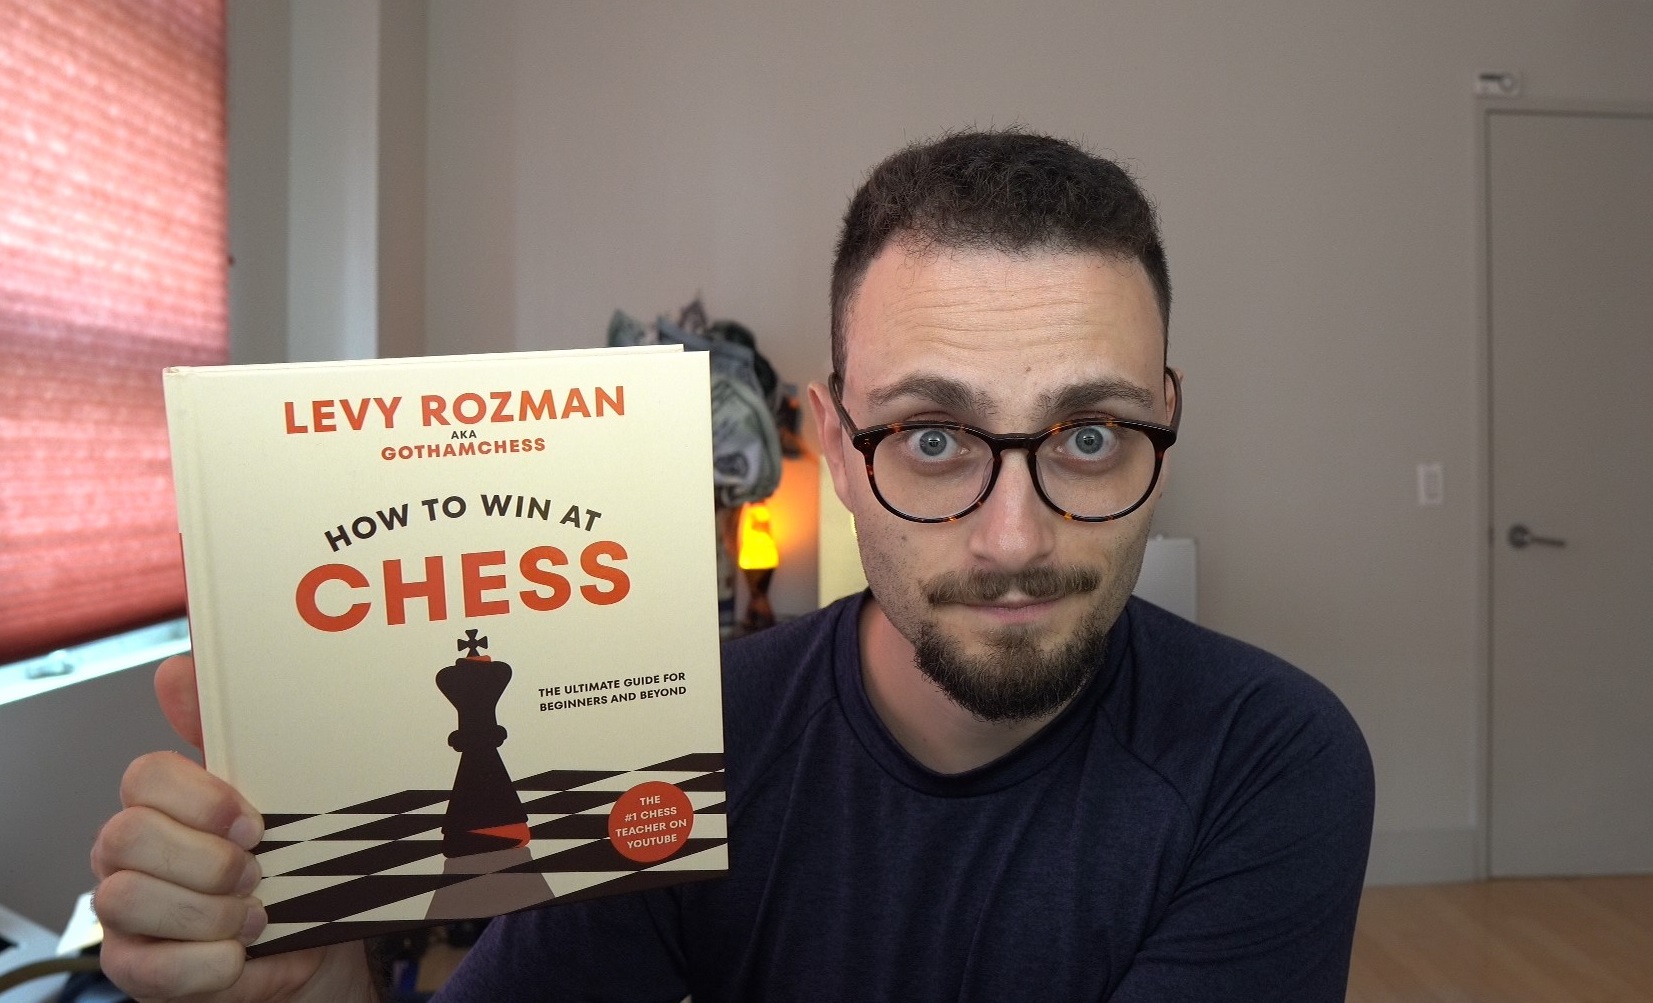 GothamChess is now a New York Times bestseller and a Forbes 30